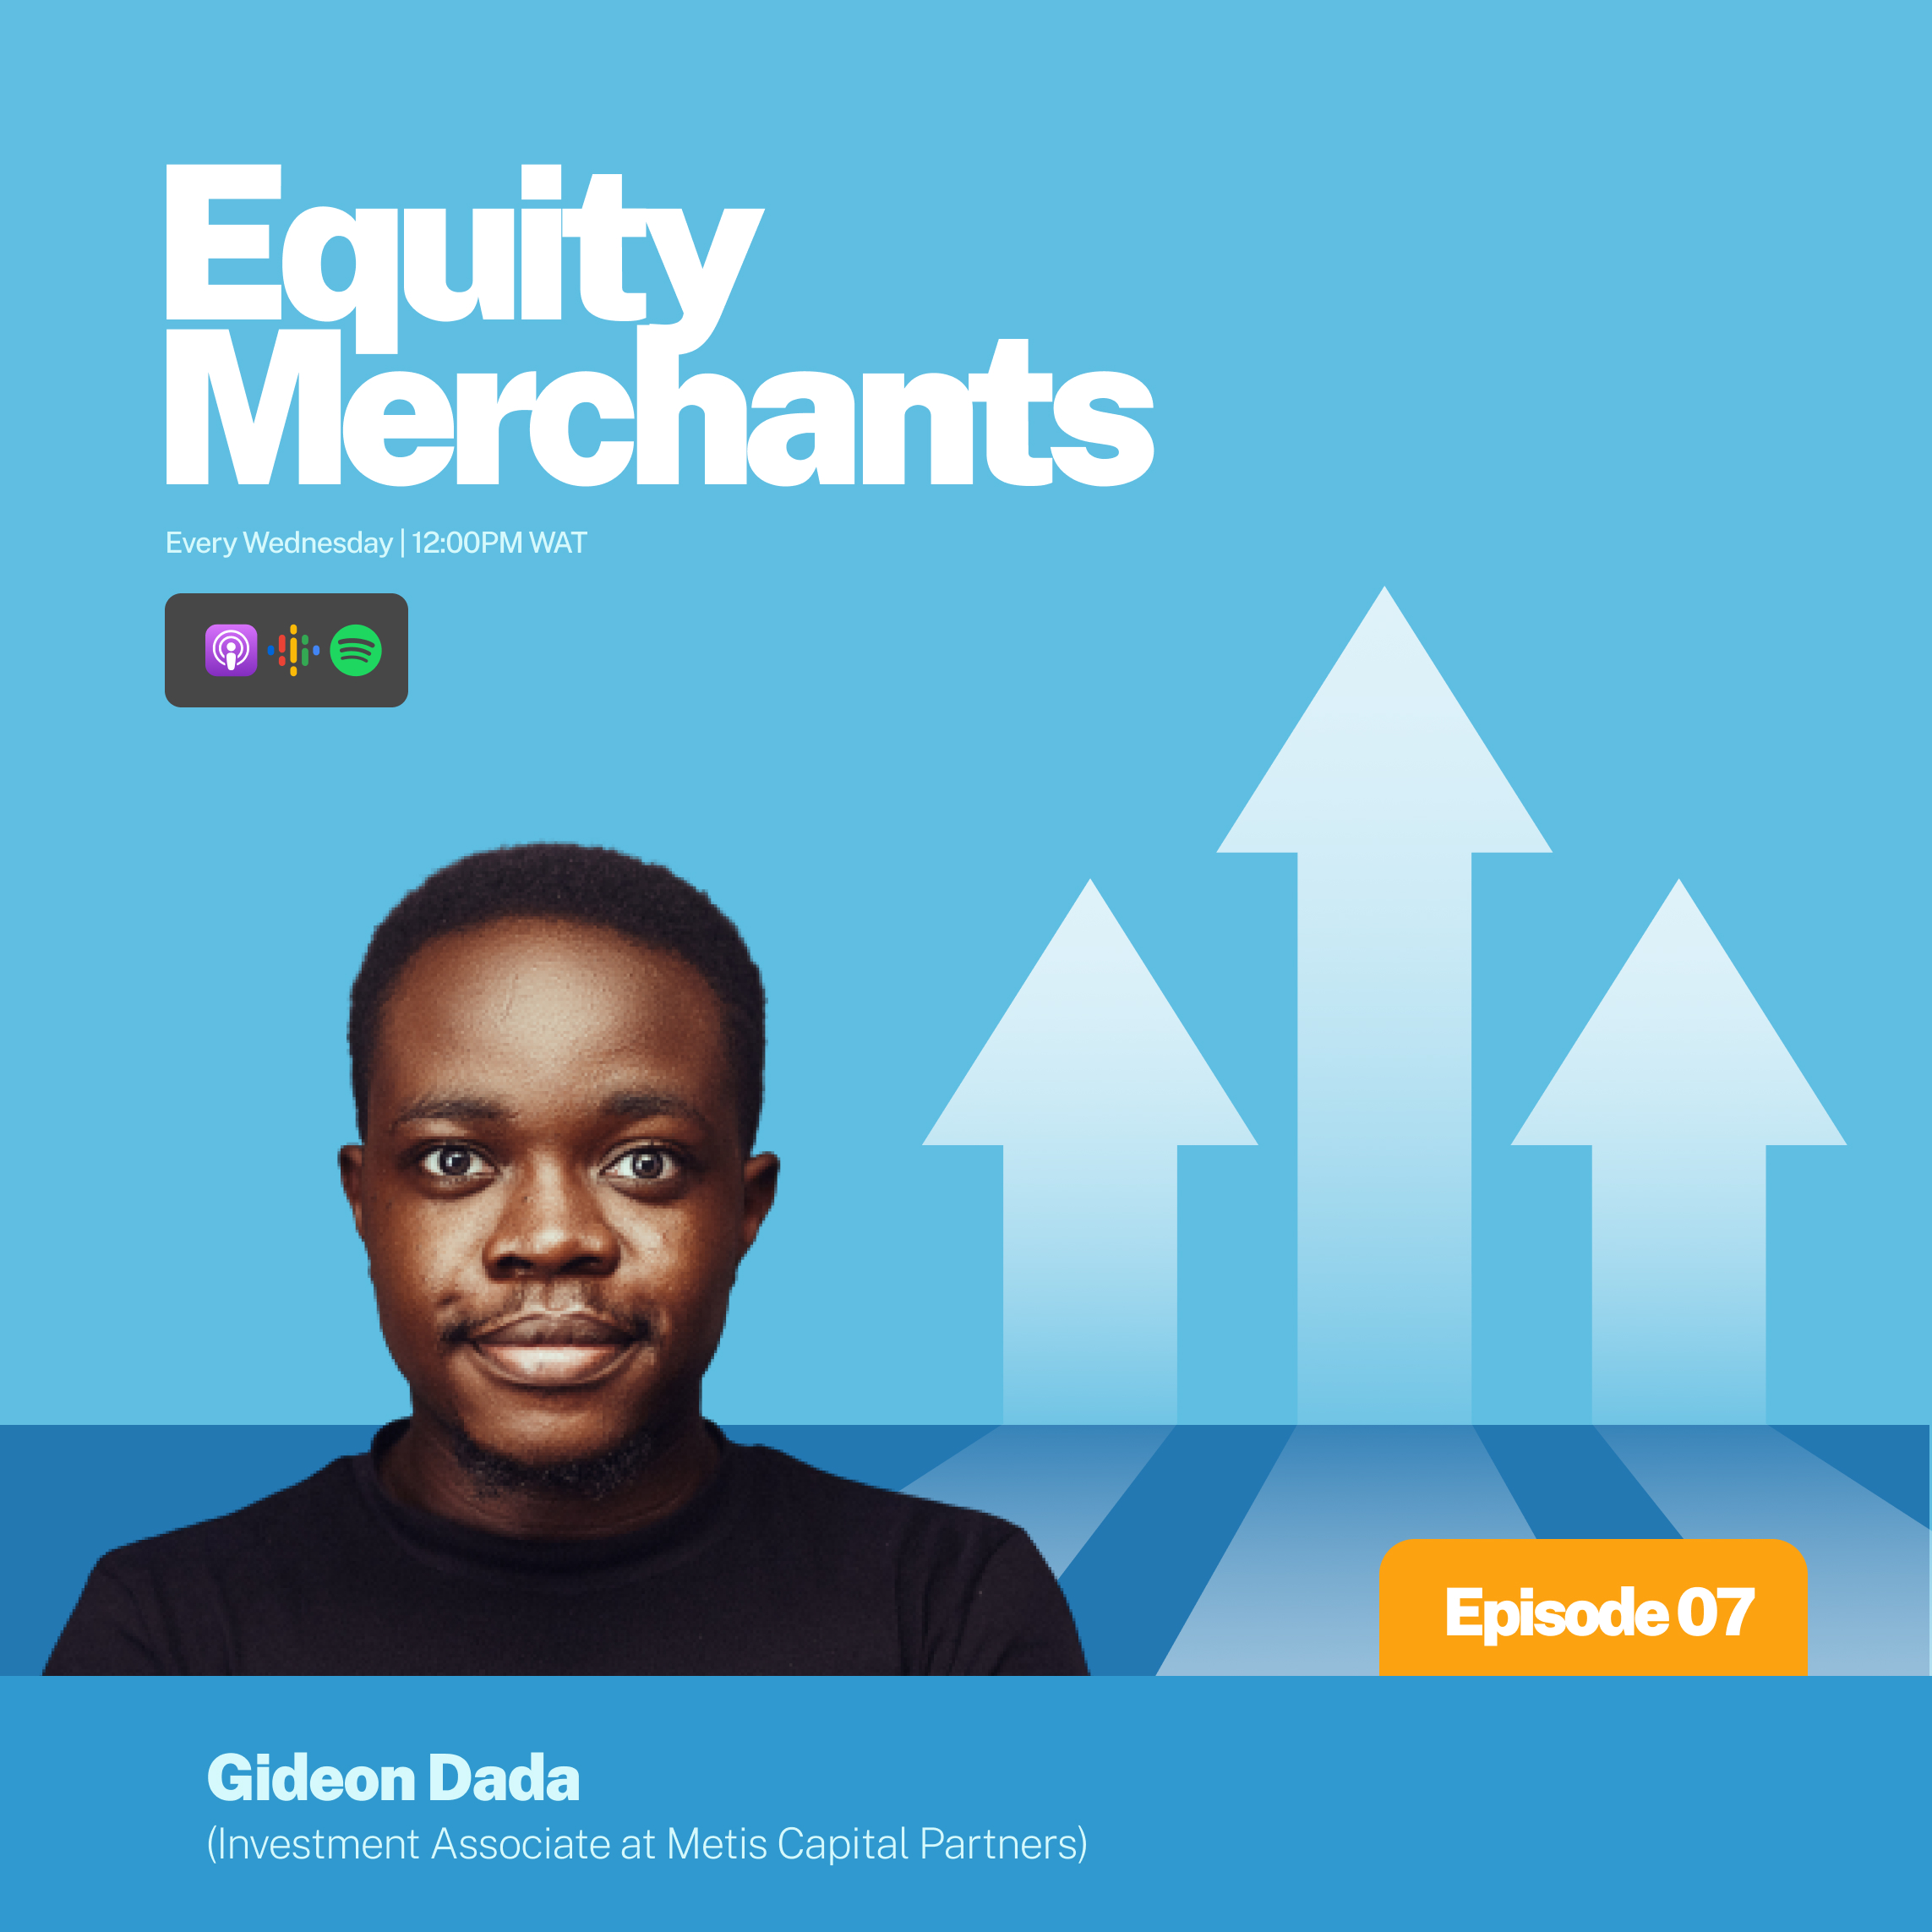 Metis Capital Partners' Gideon Dada on moving from investment banking to venture capital, entrepreneurs that should avoid VC funding, and why fintech gets the most funding.